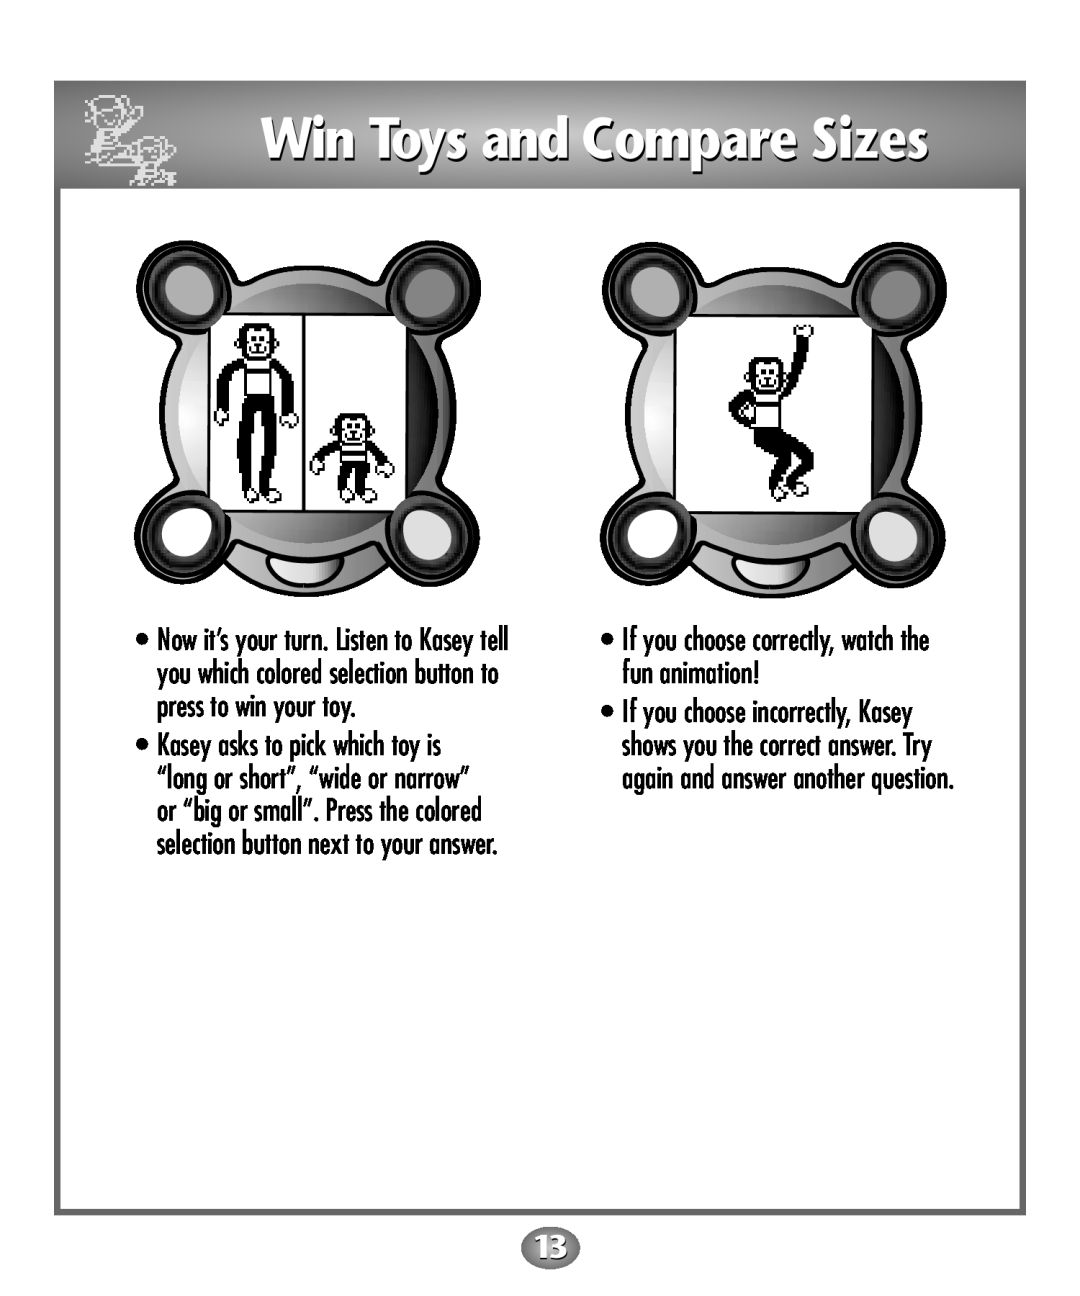 Fisher-Price Baby Toy manual If you choose correctly, watch the fun animation, Win Toys and Compare Sizes 